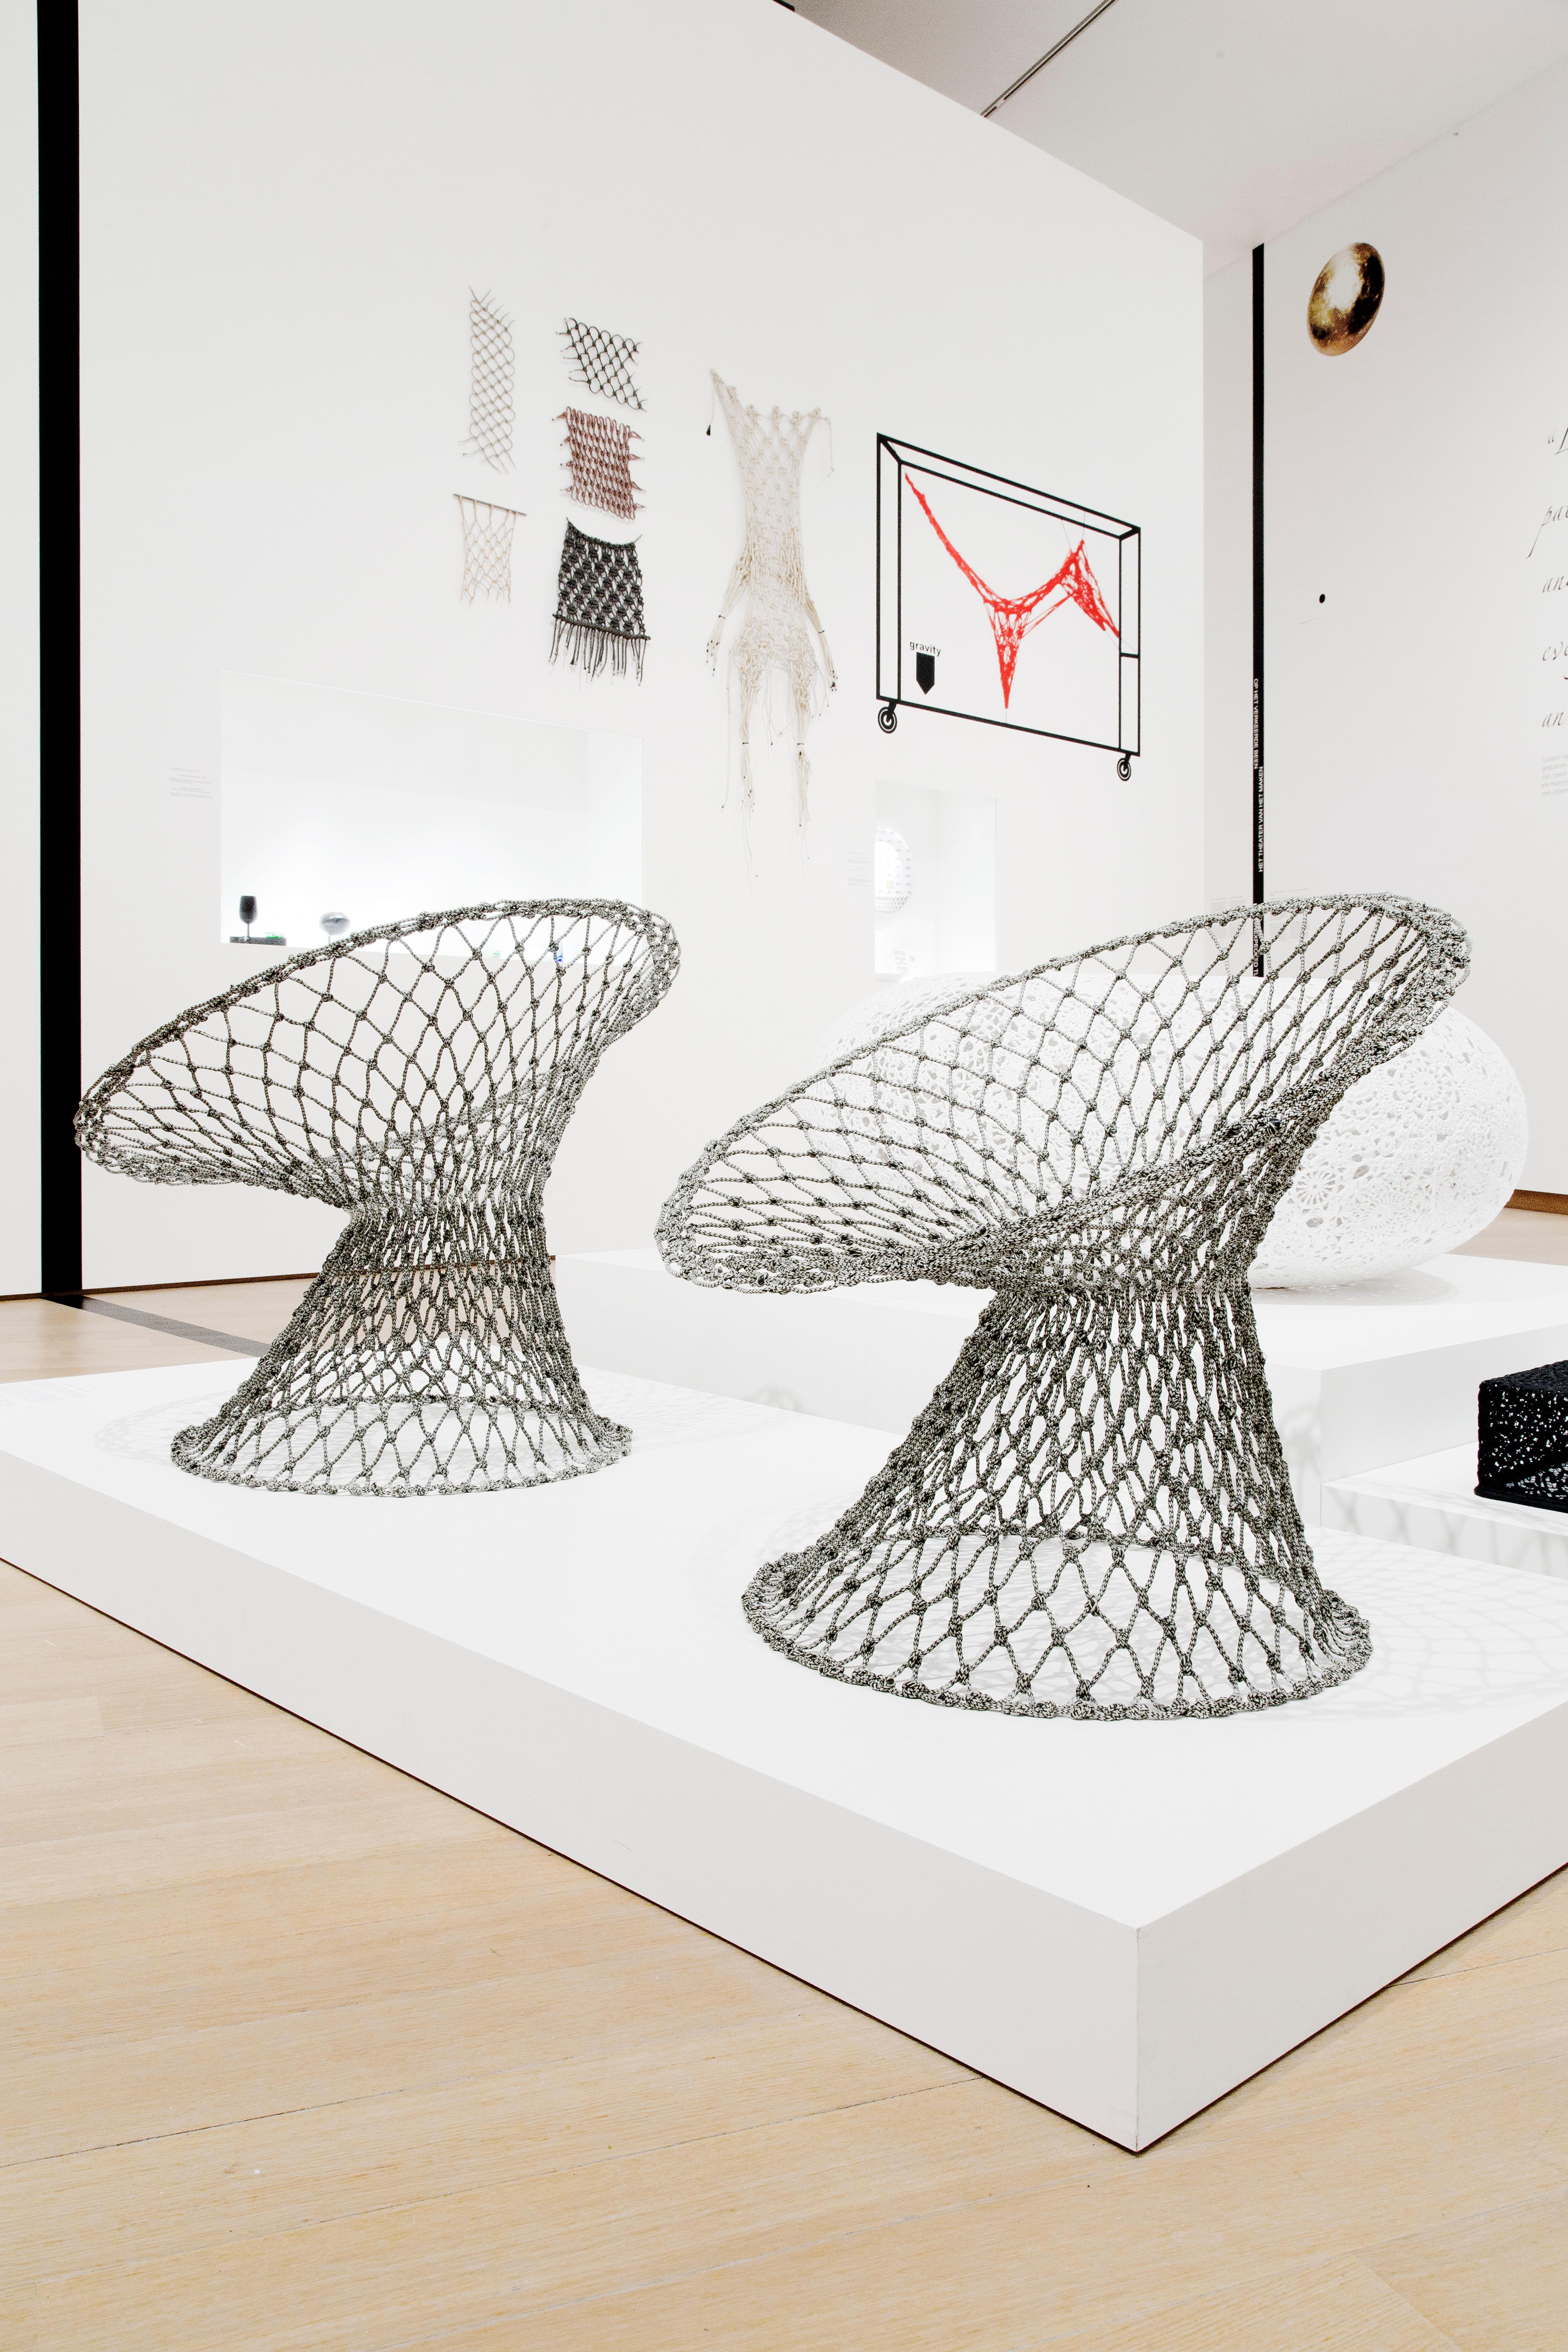 Dutch Fishnet Chair, by Marcel Wanders, Hand-Knotted Chair, 2001, Green For Sale